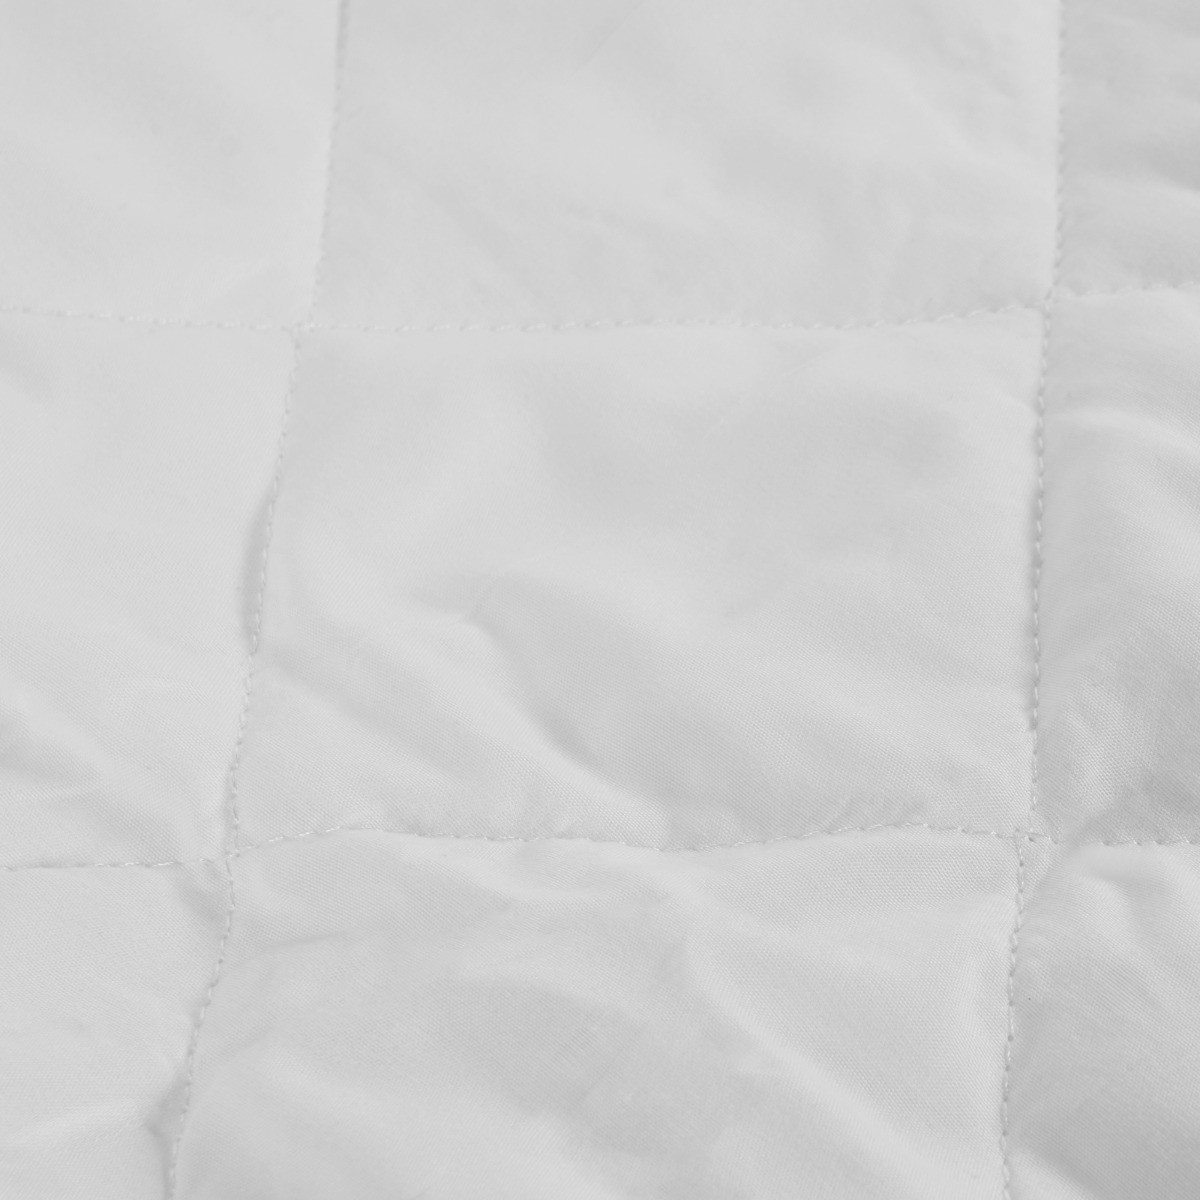 OHS Cosy Quilted Waterproof Mattress Protector - White